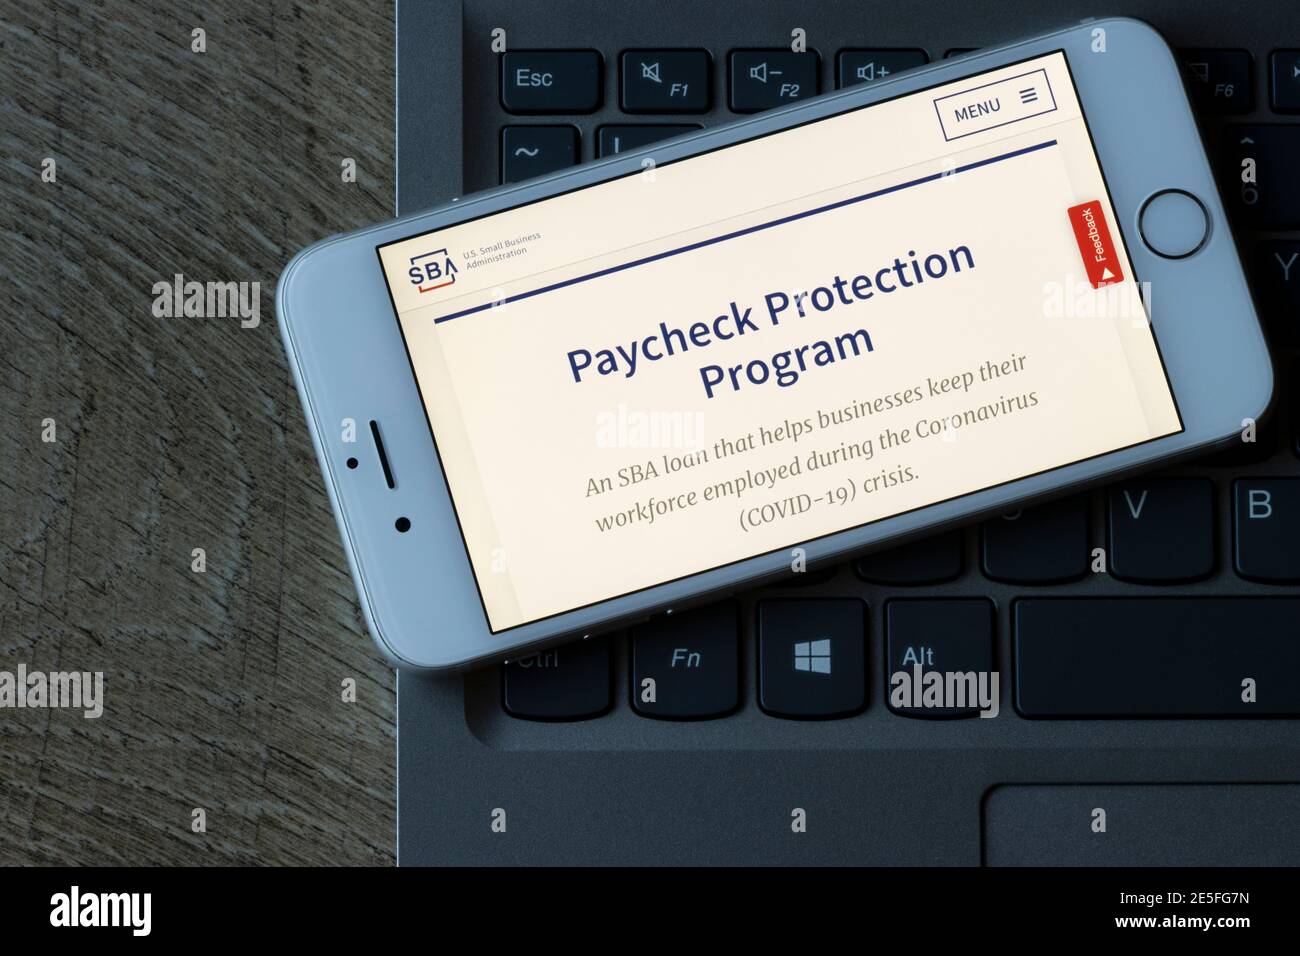 The U.S. Small Business Administration website's Paycheck Protection Program (PPP) page is seen on a phone on January 22, 2021. Stock Photo